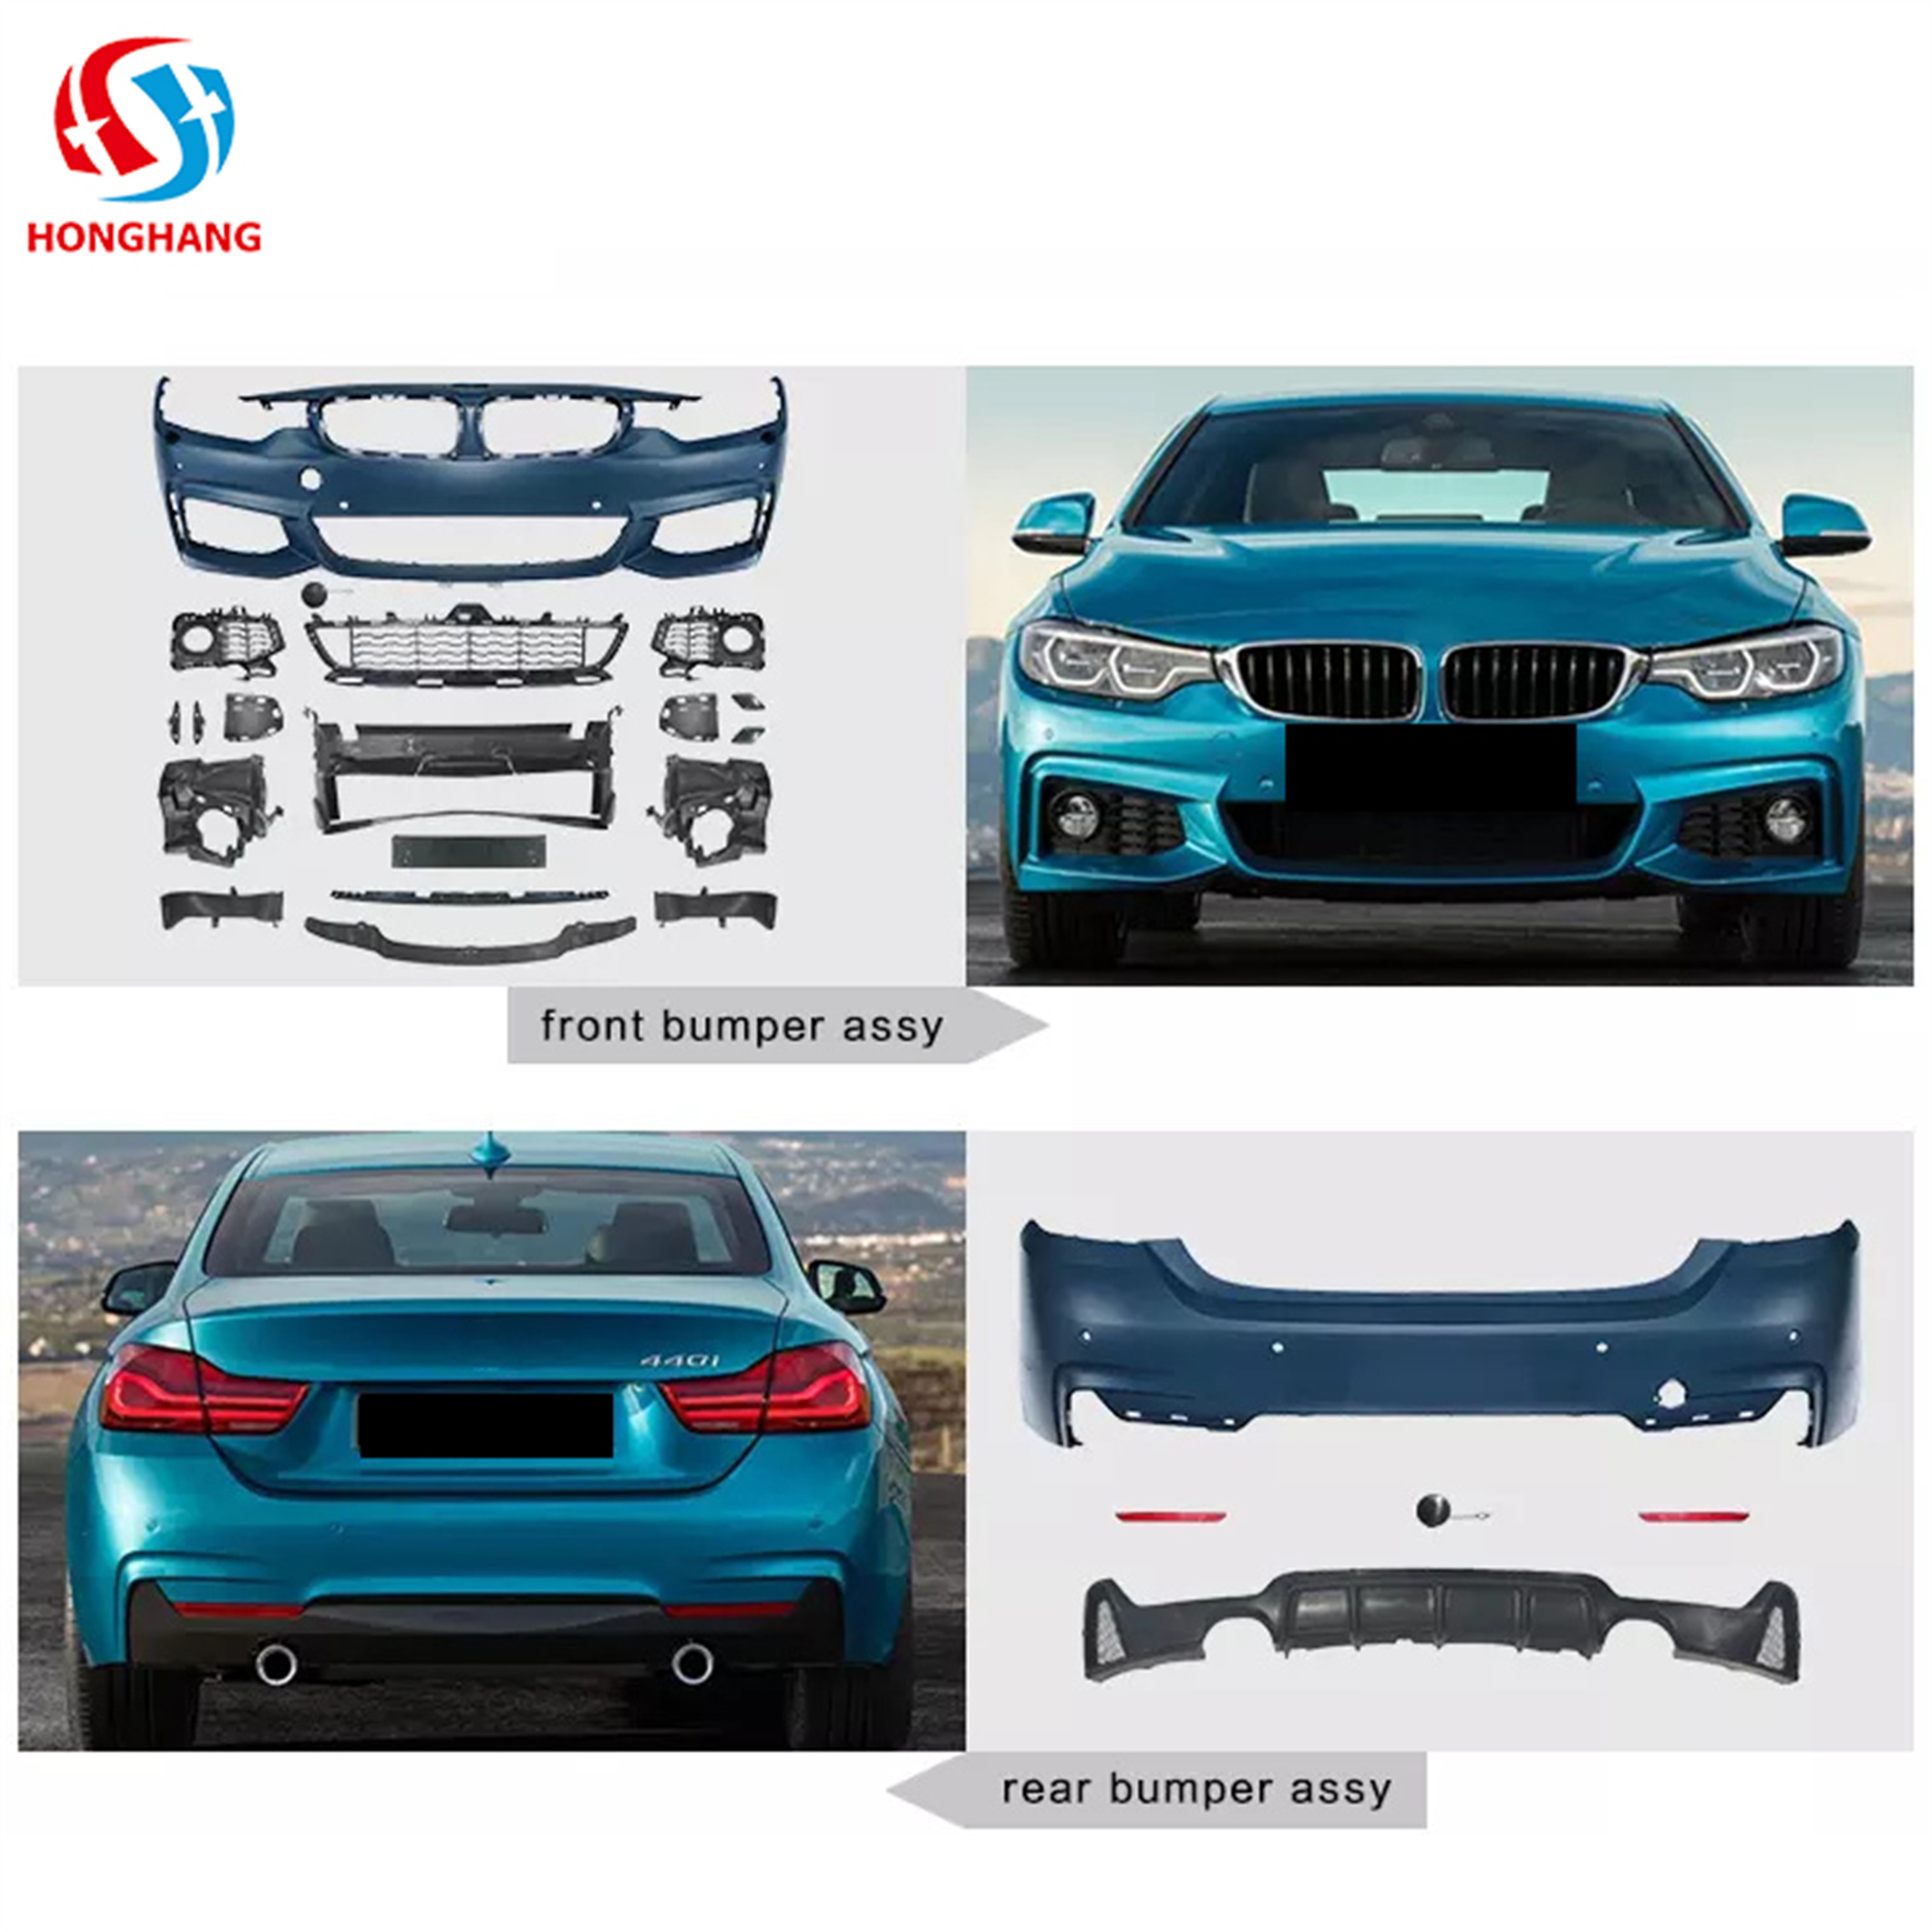 M-tech Style Body Kit for Bmw 4 Series F32 F36 2014-2017